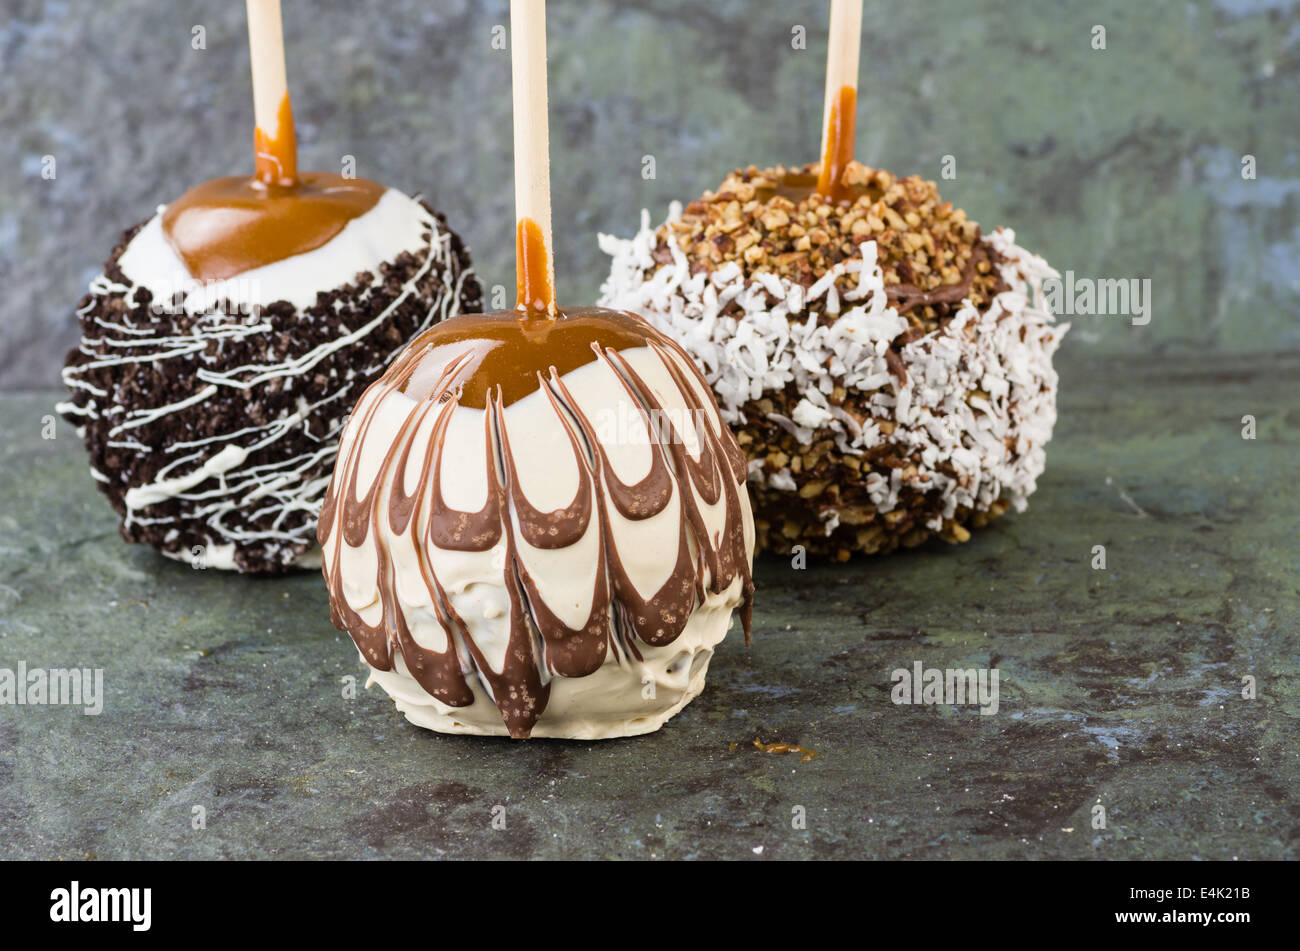 Sweet chocolate or caramel covered apples with nuts Stock Photo